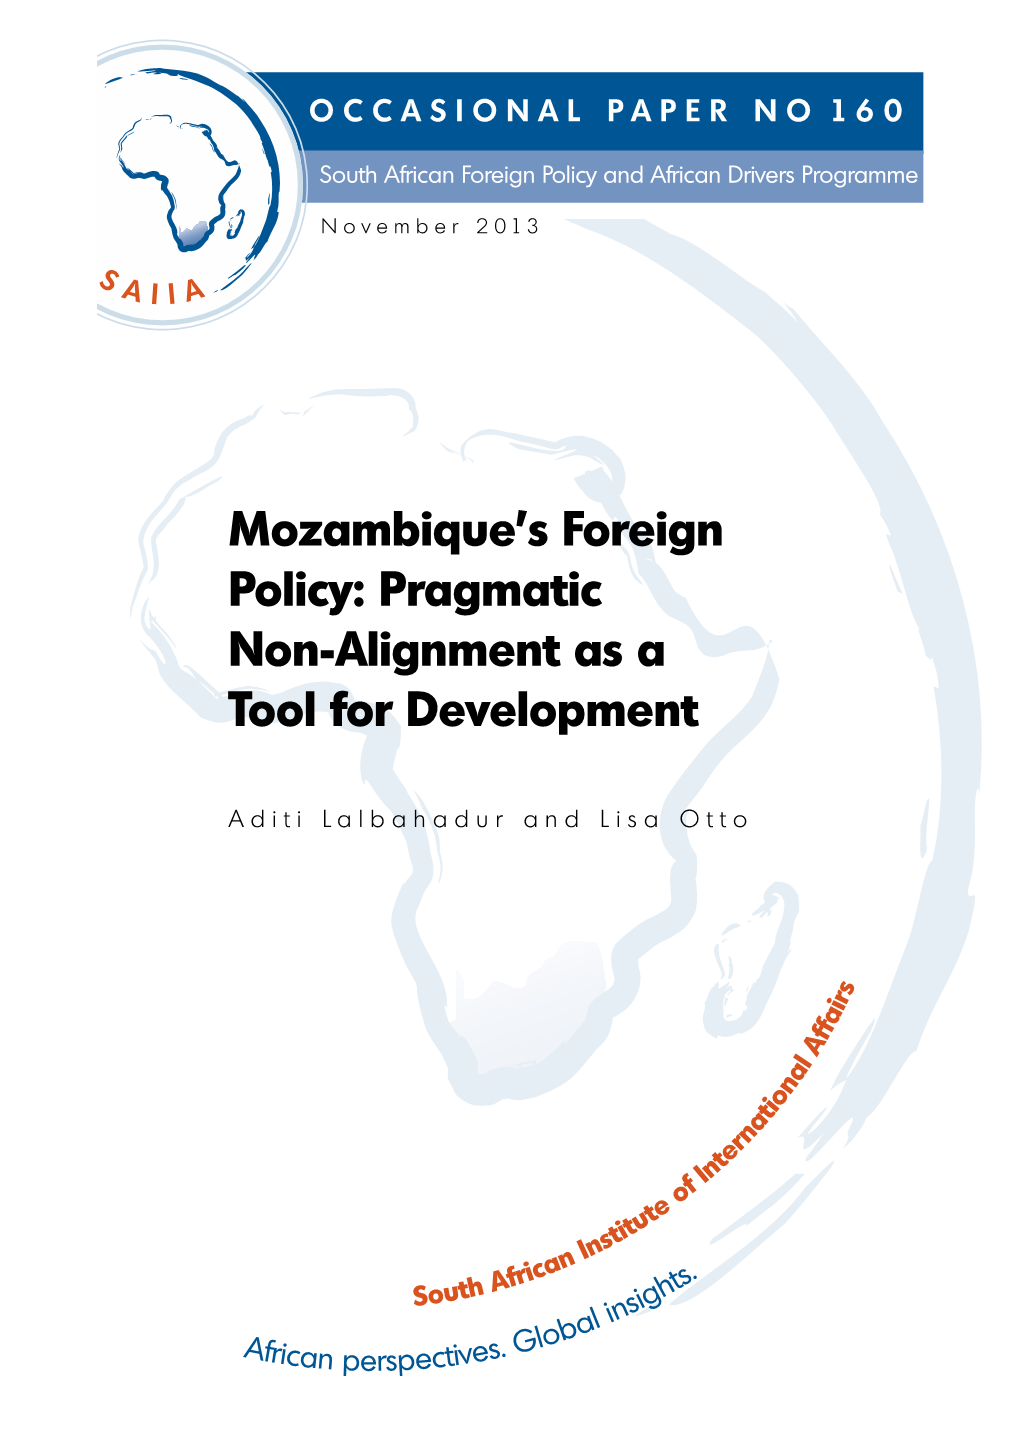 Mozambique's Foreign Policy